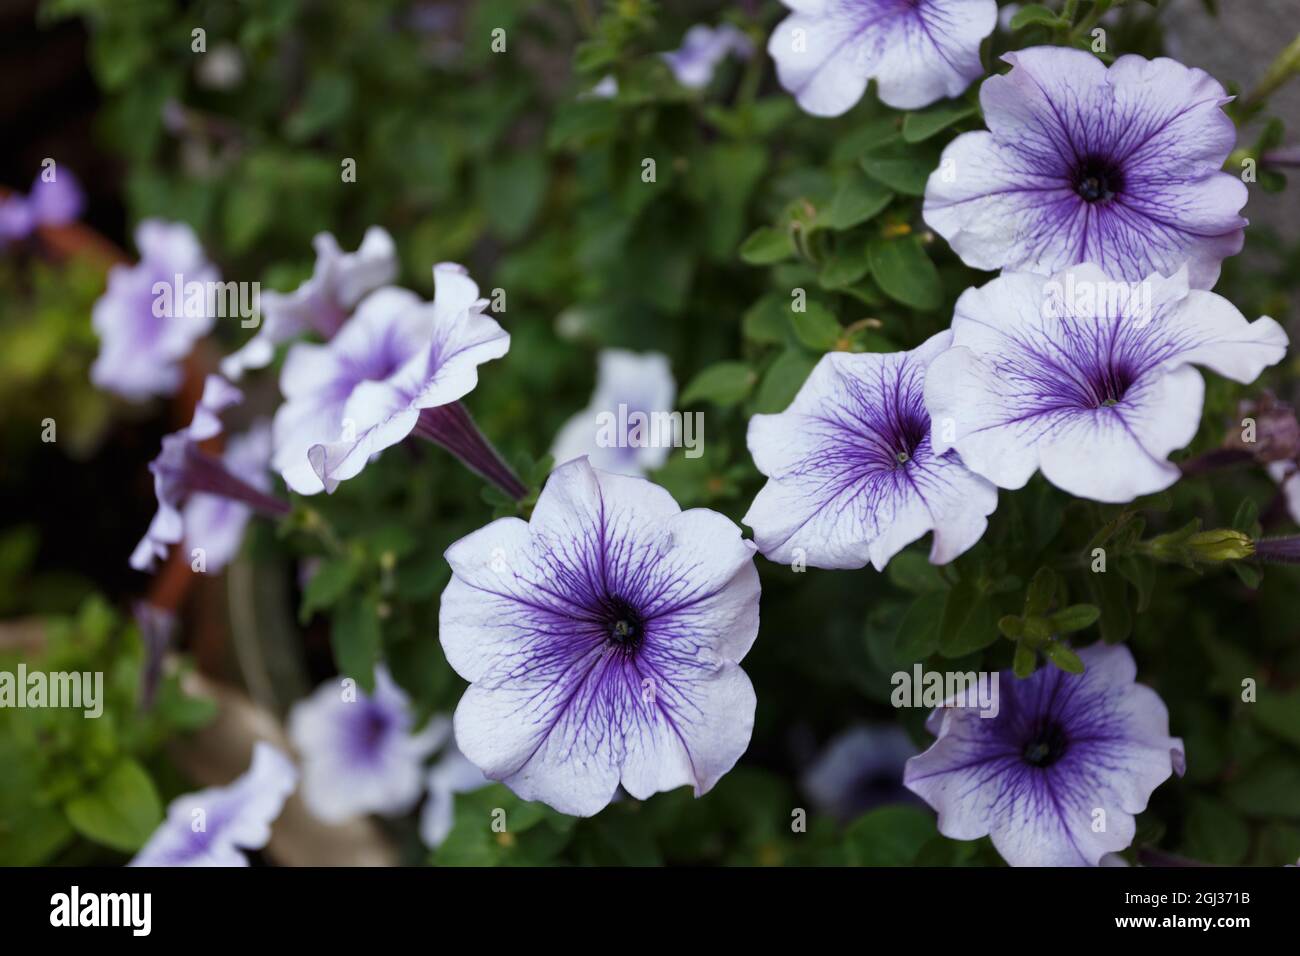 Purple petunia flowers in the garden close up Stock Photo